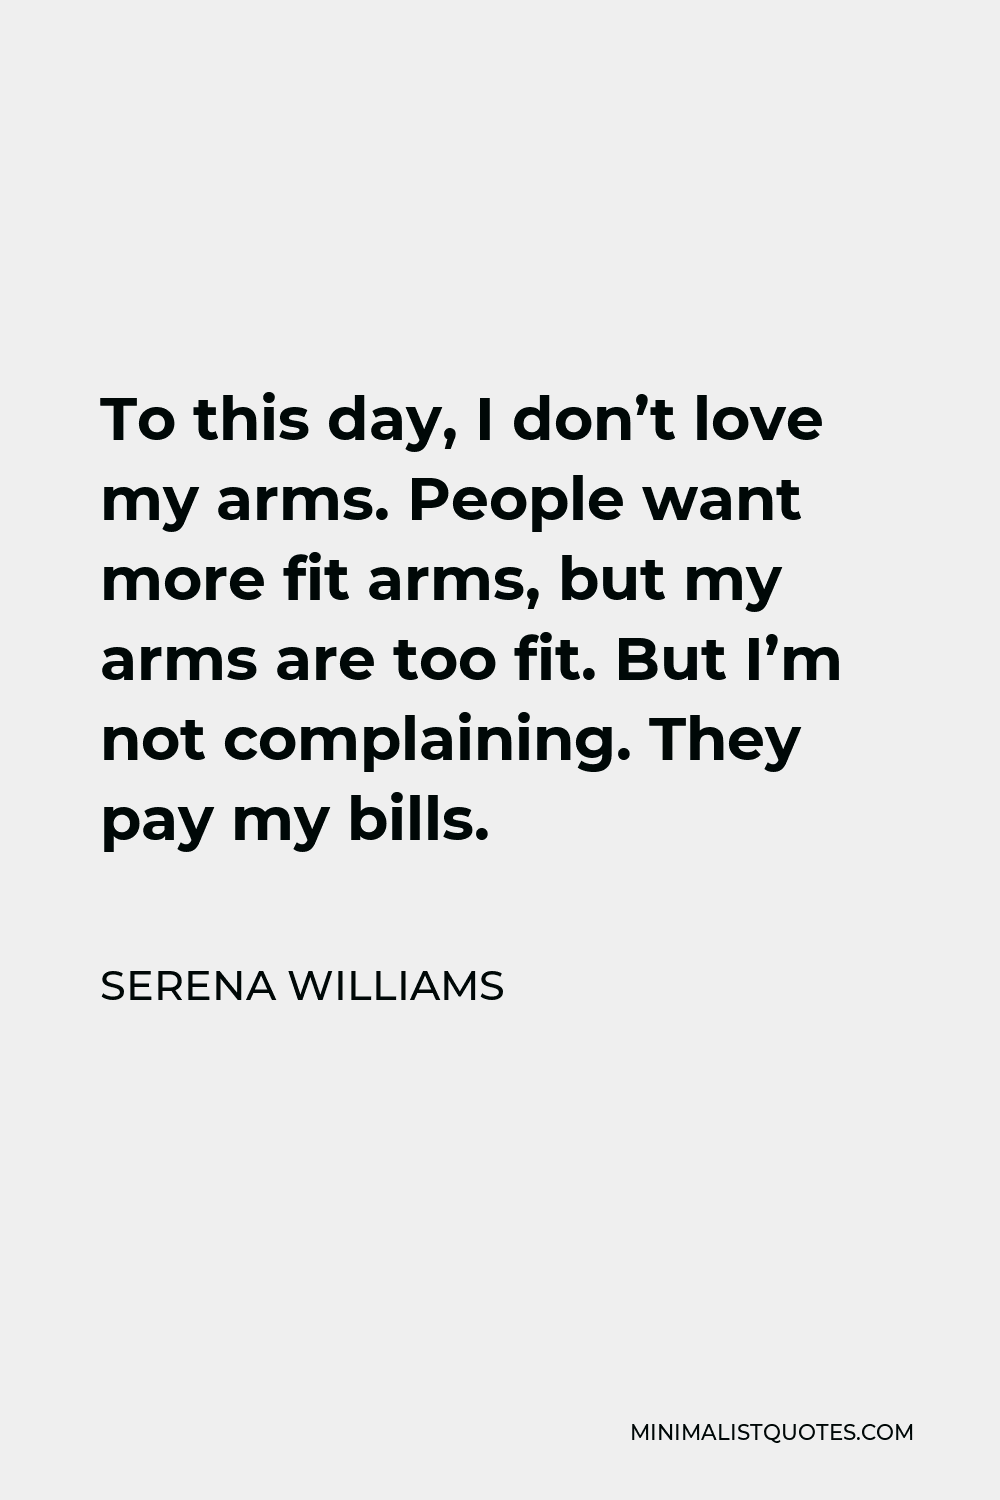 Serena Williams Quote - To this day, I don’t love my arms. People want more fit arms, but my arms are too fit. But I’m not complaining. They pay my bills.